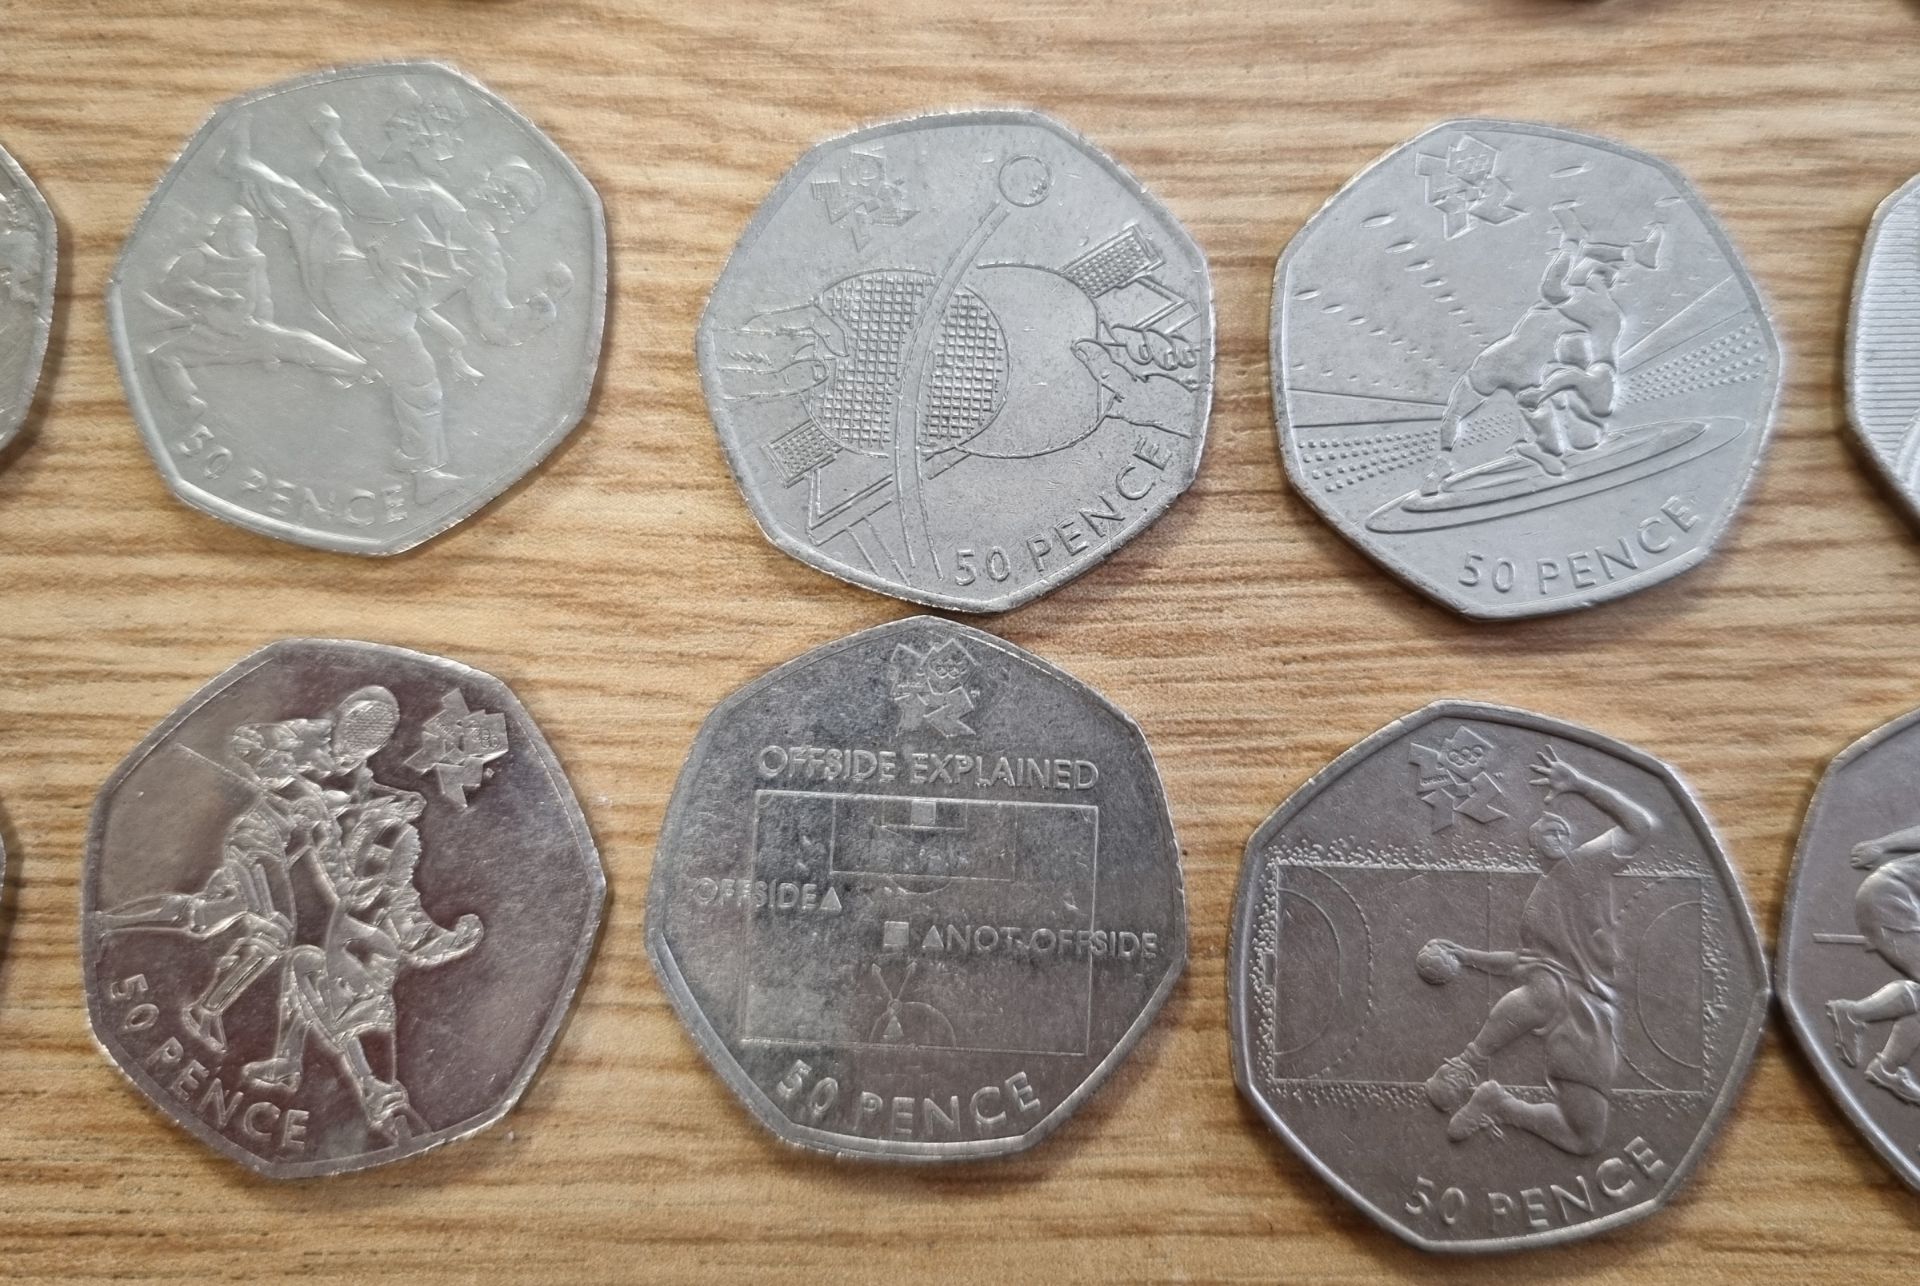 Collection of collectable 2012 Olympics 50p coins - Full set of 29 coins - see pictures - Image 8 of 11